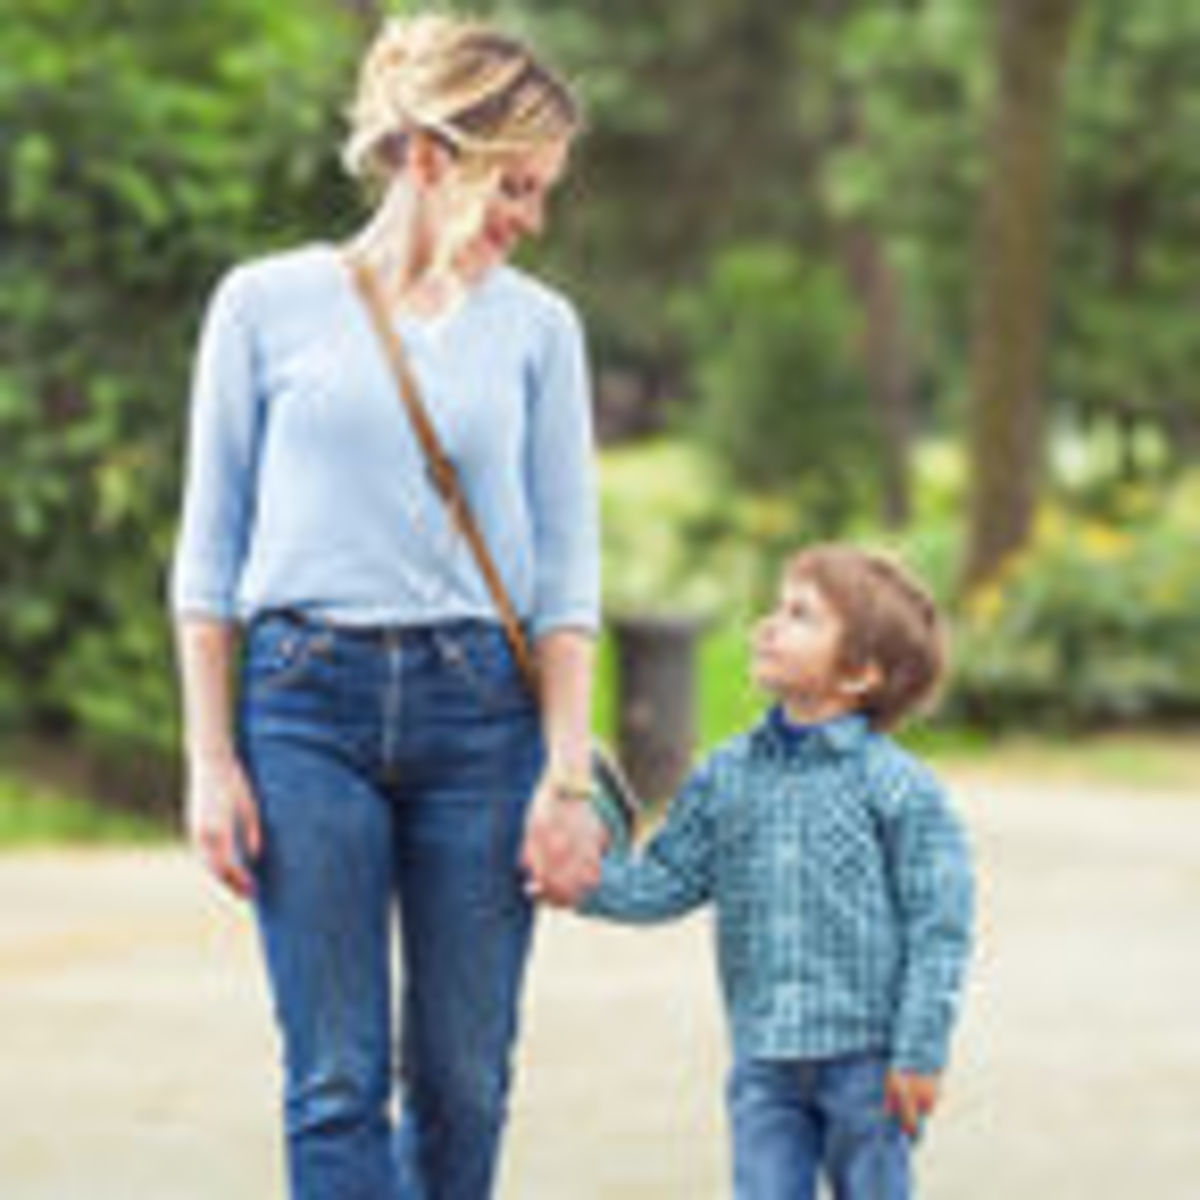 Mom Cheange Dress Son Look That - Mommy Nearest | Psychology Today